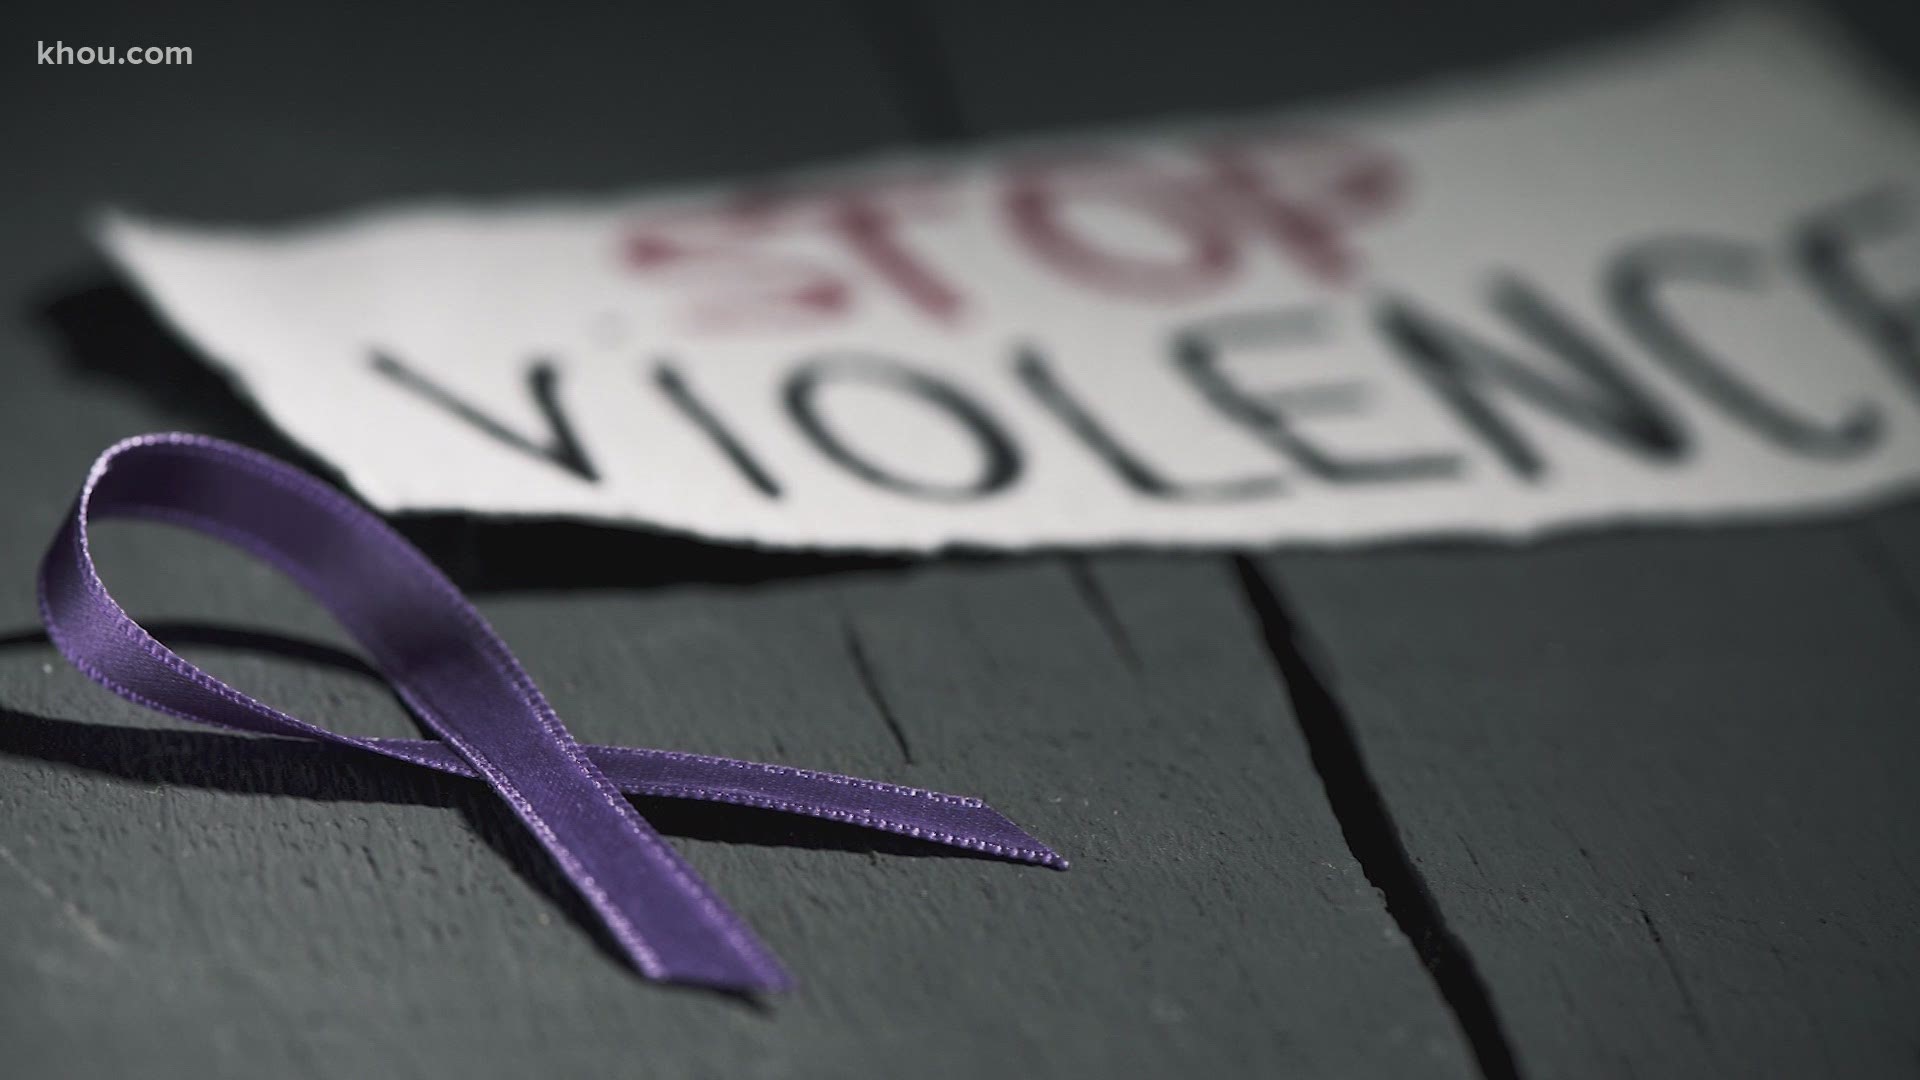 Dr. Asim Shah said one out of every four women and one out of every 10 men are victims of intimate partner violence.